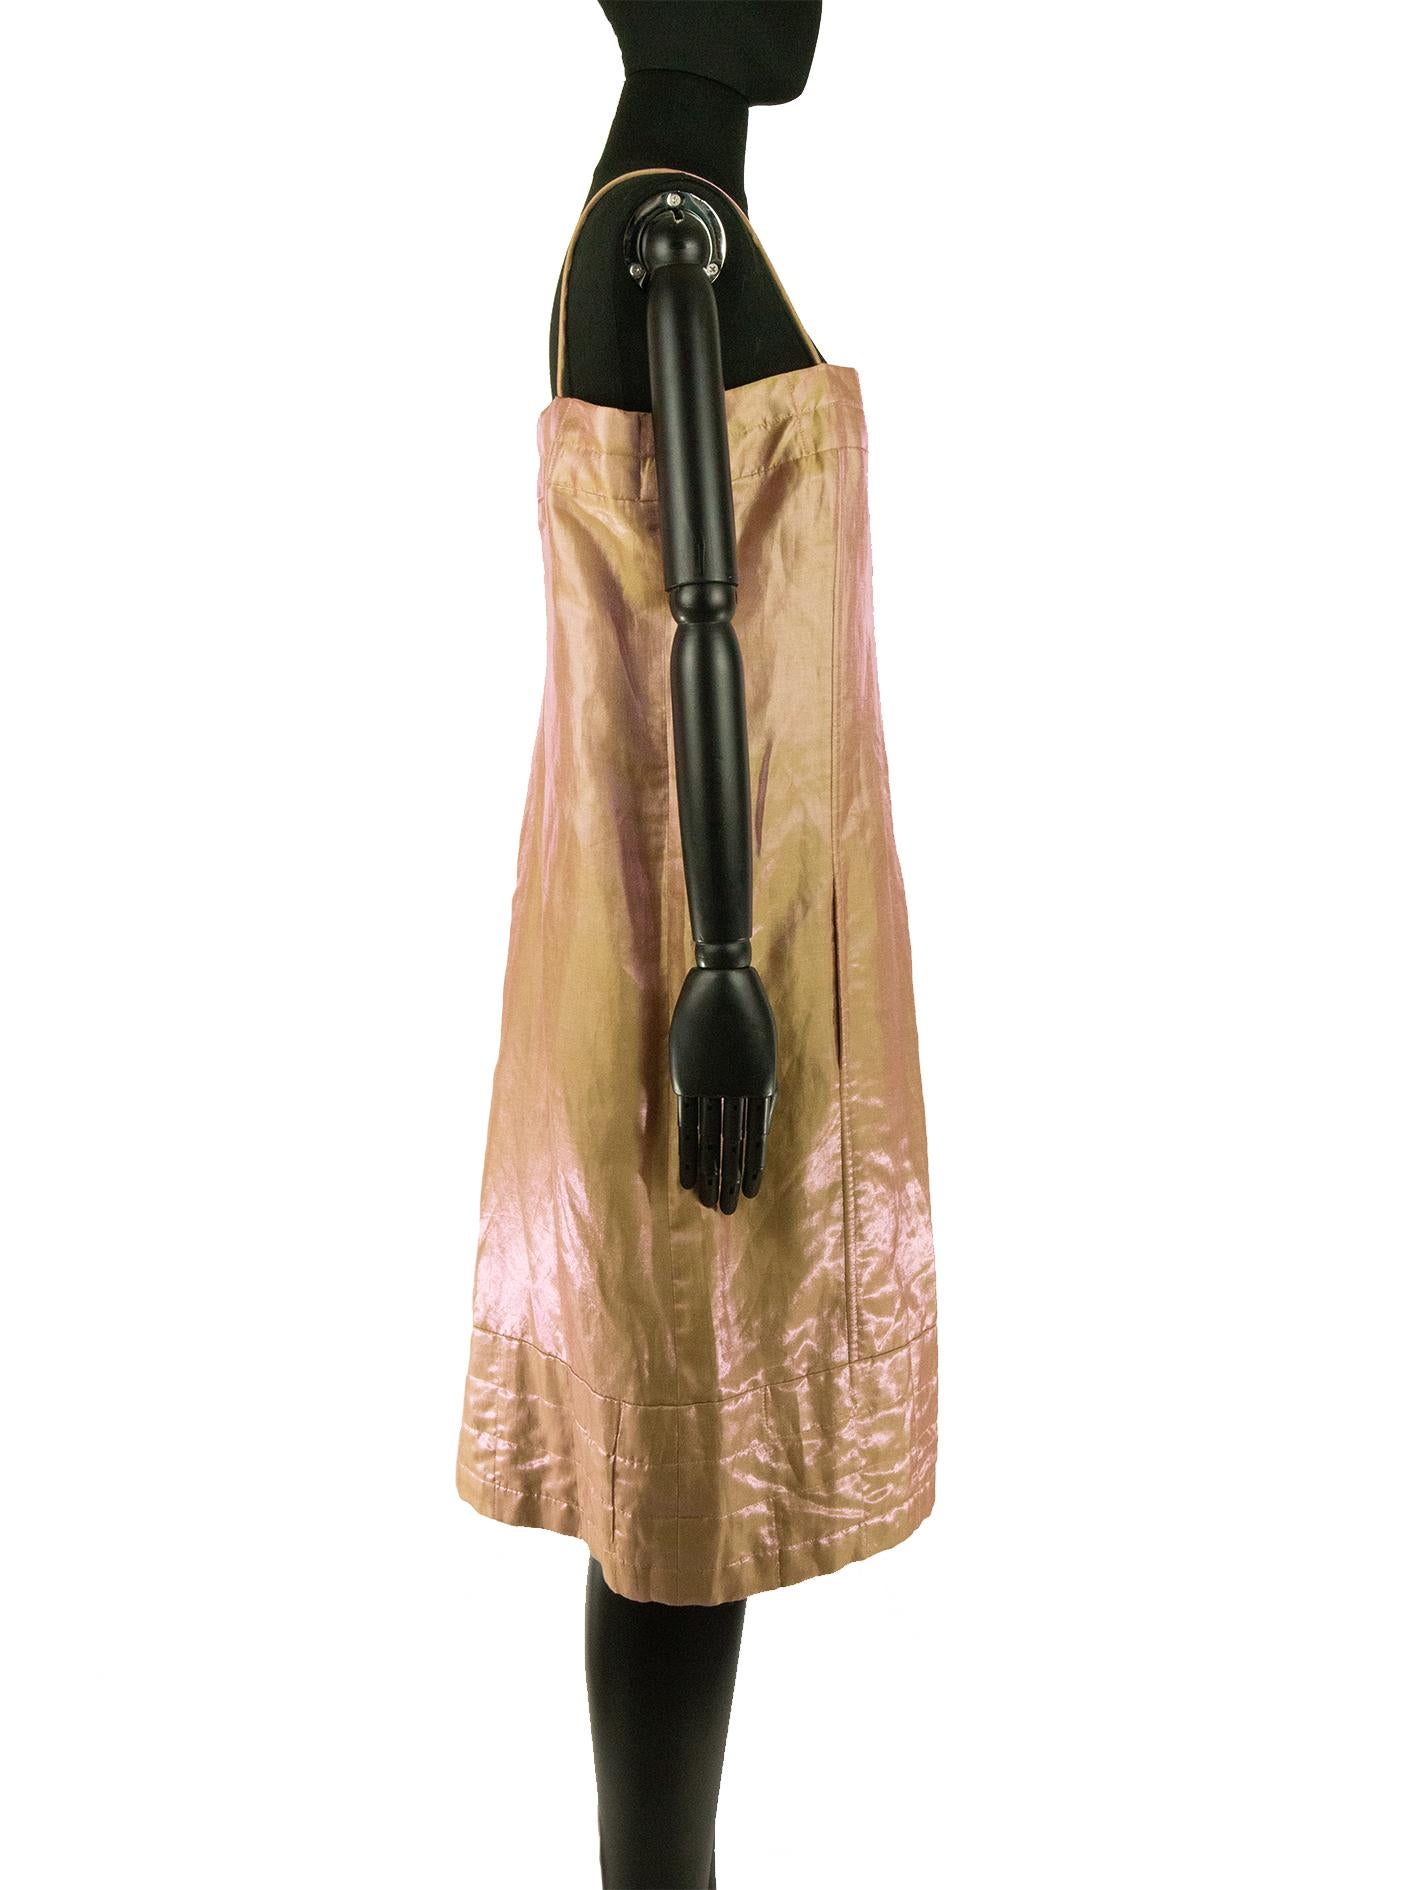 A Chanel sun dress in peach and metallic pink shot taffeta from the brand Spring 1999 collection. The reflective quality of the fabric makes the dress shift colour under movement. The dress has a straight neckline and is held up with spaghetti